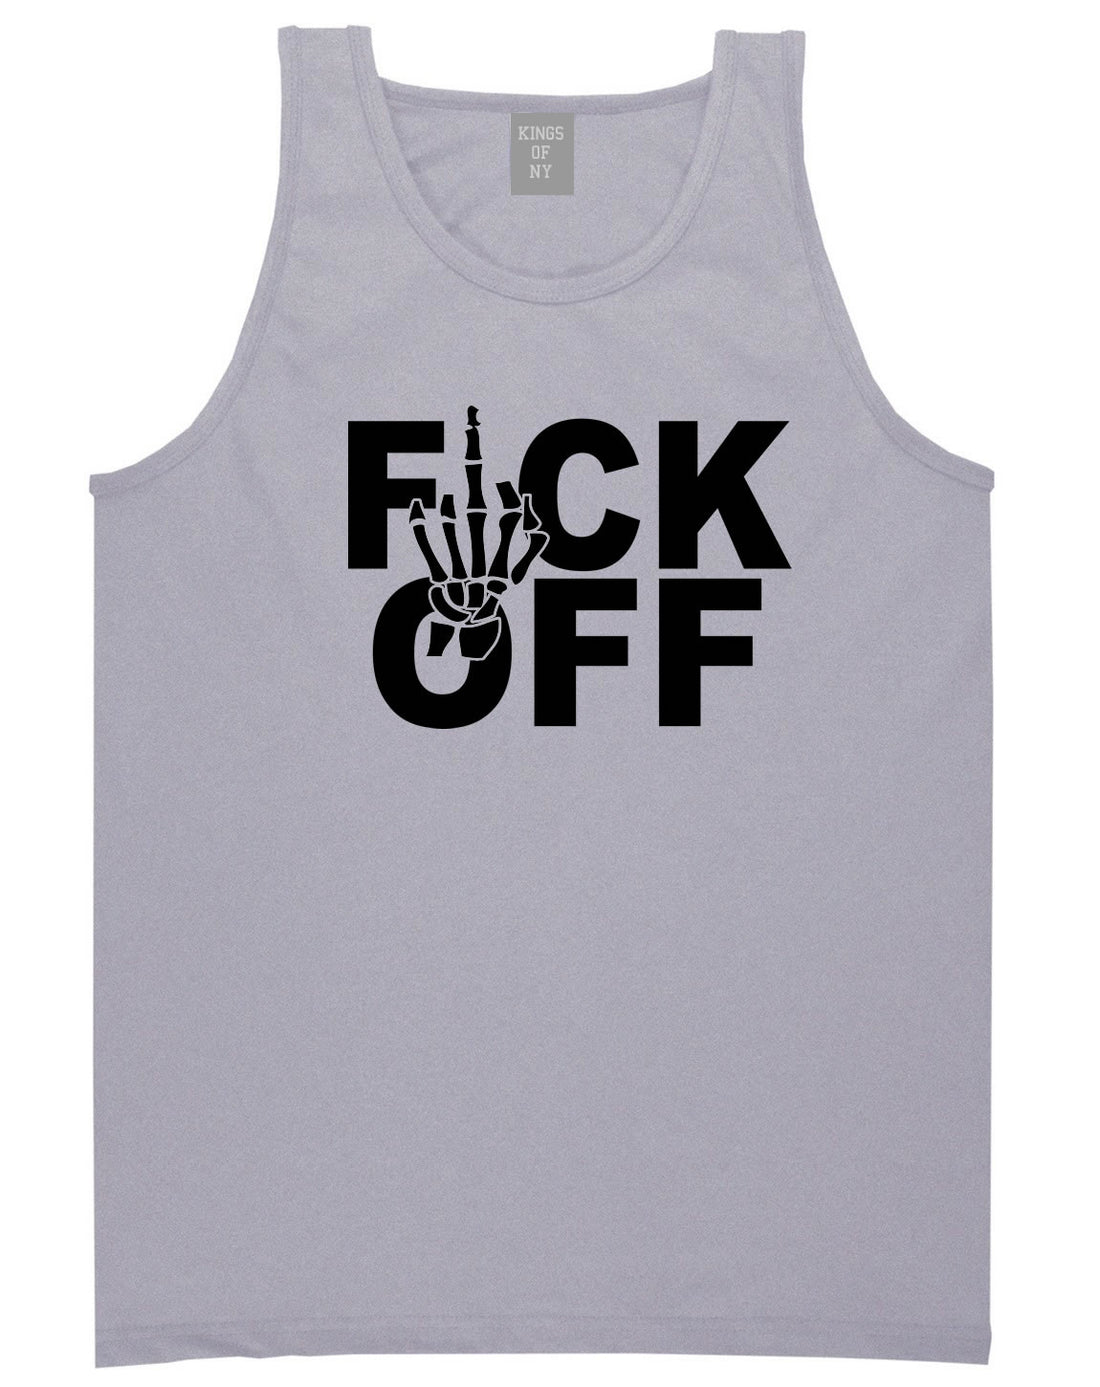 FCK OFF Skeleton Hand Tank Top in Grey by Kings Of NY